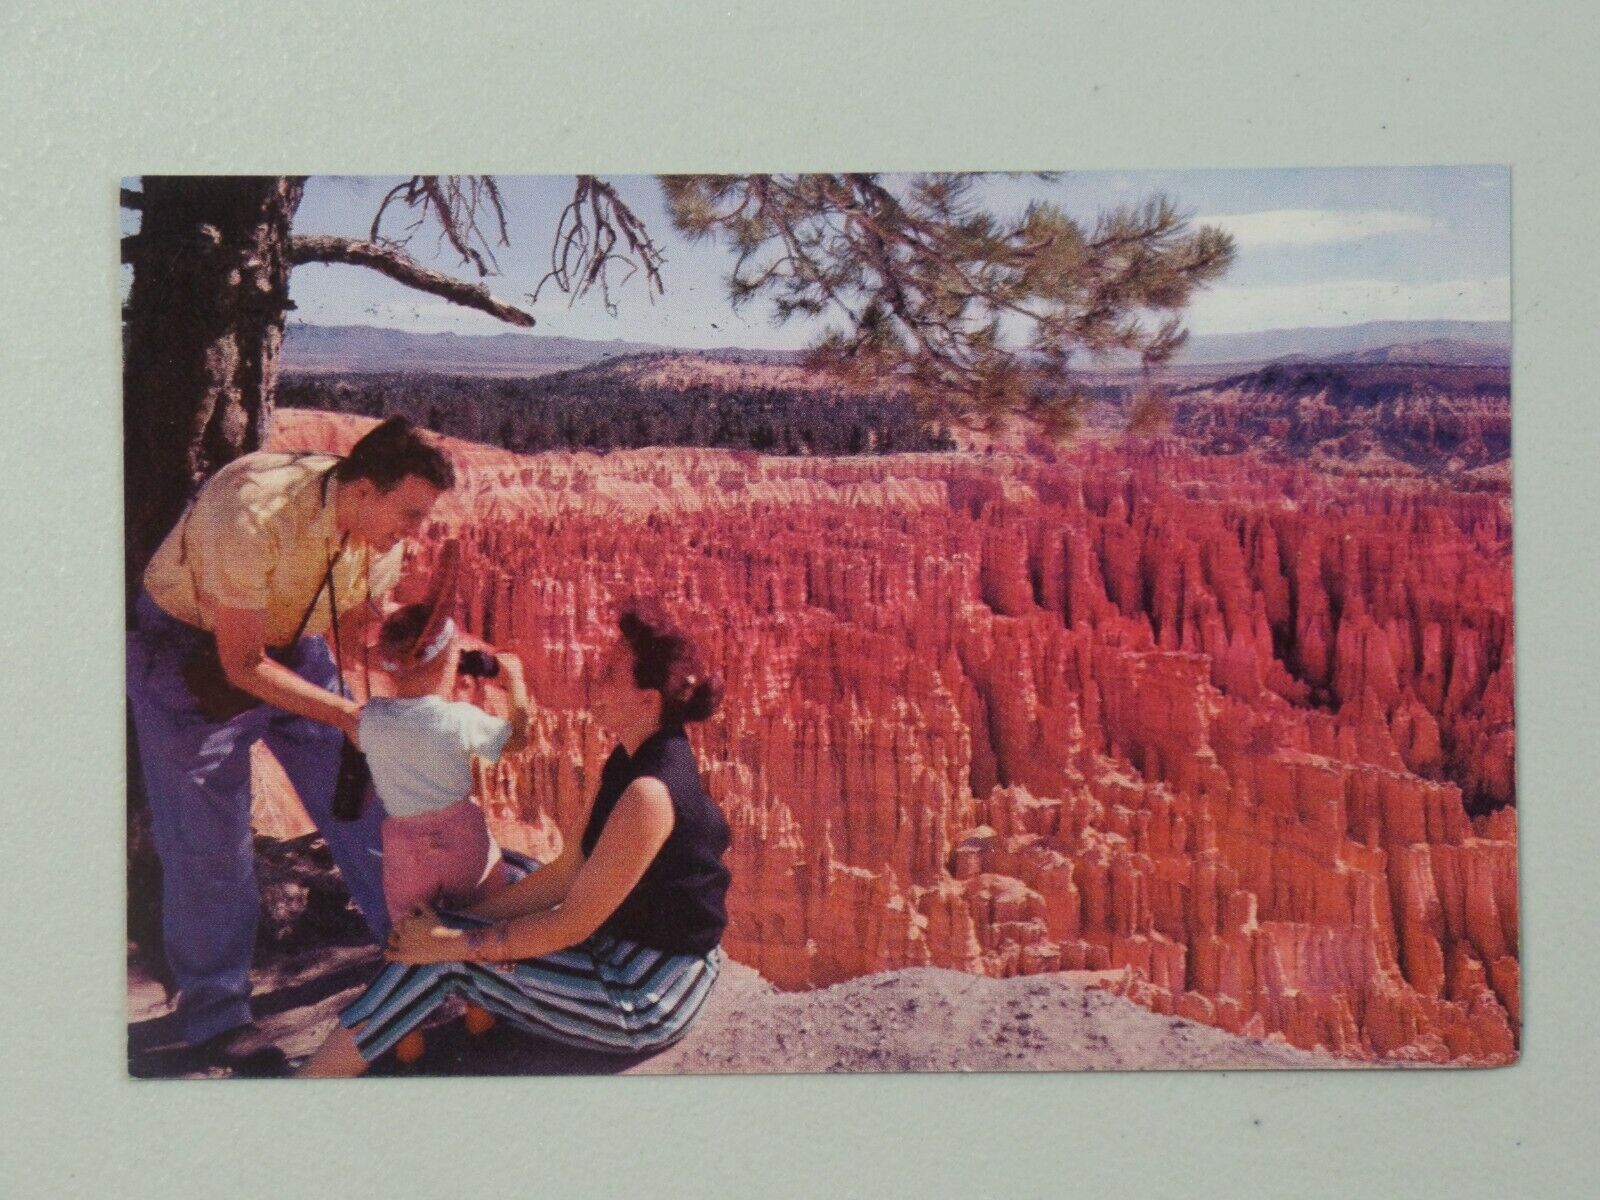 Bryce Canyon National Park, Utah Union Pacific Railroad Pictorial Postcard 7412